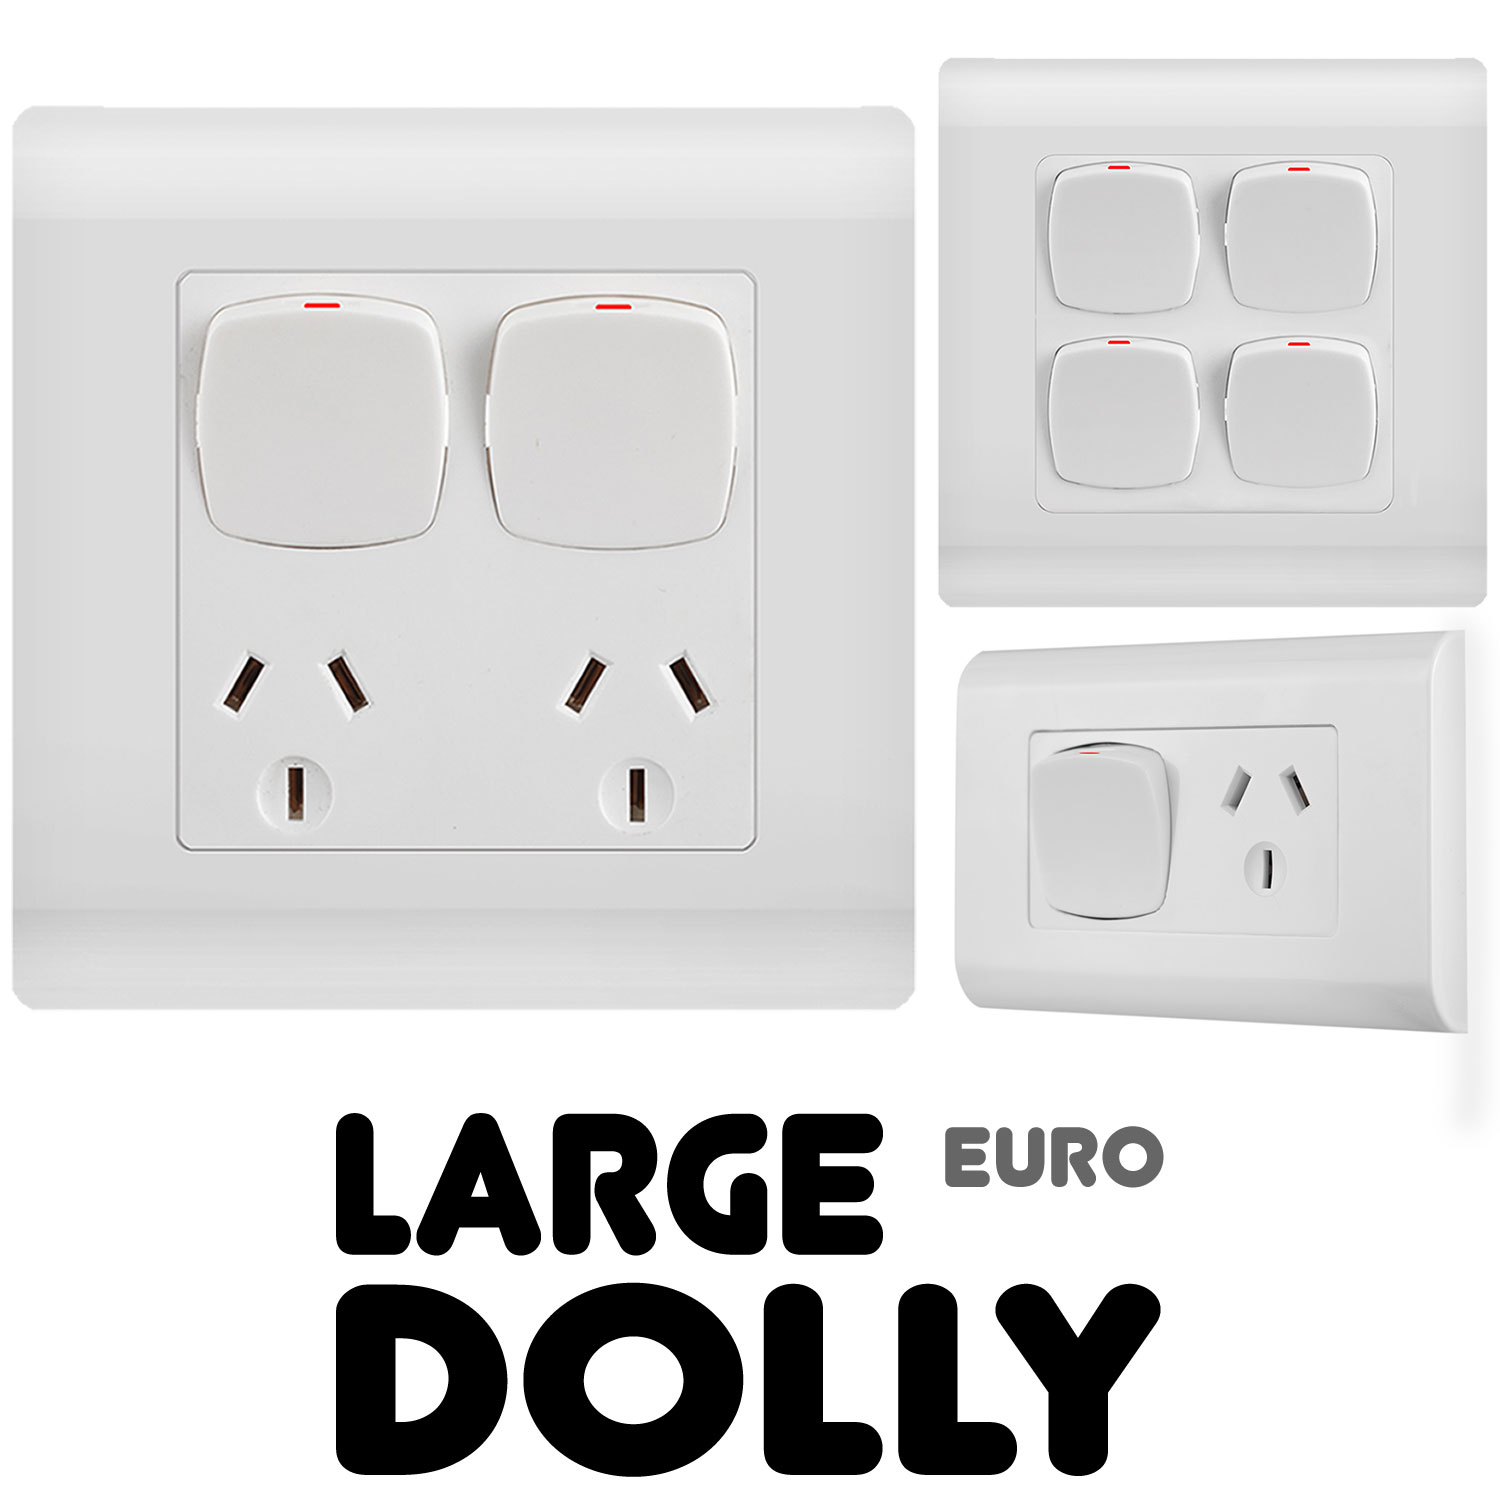 Euro Large Dolly | Outlet and Switch